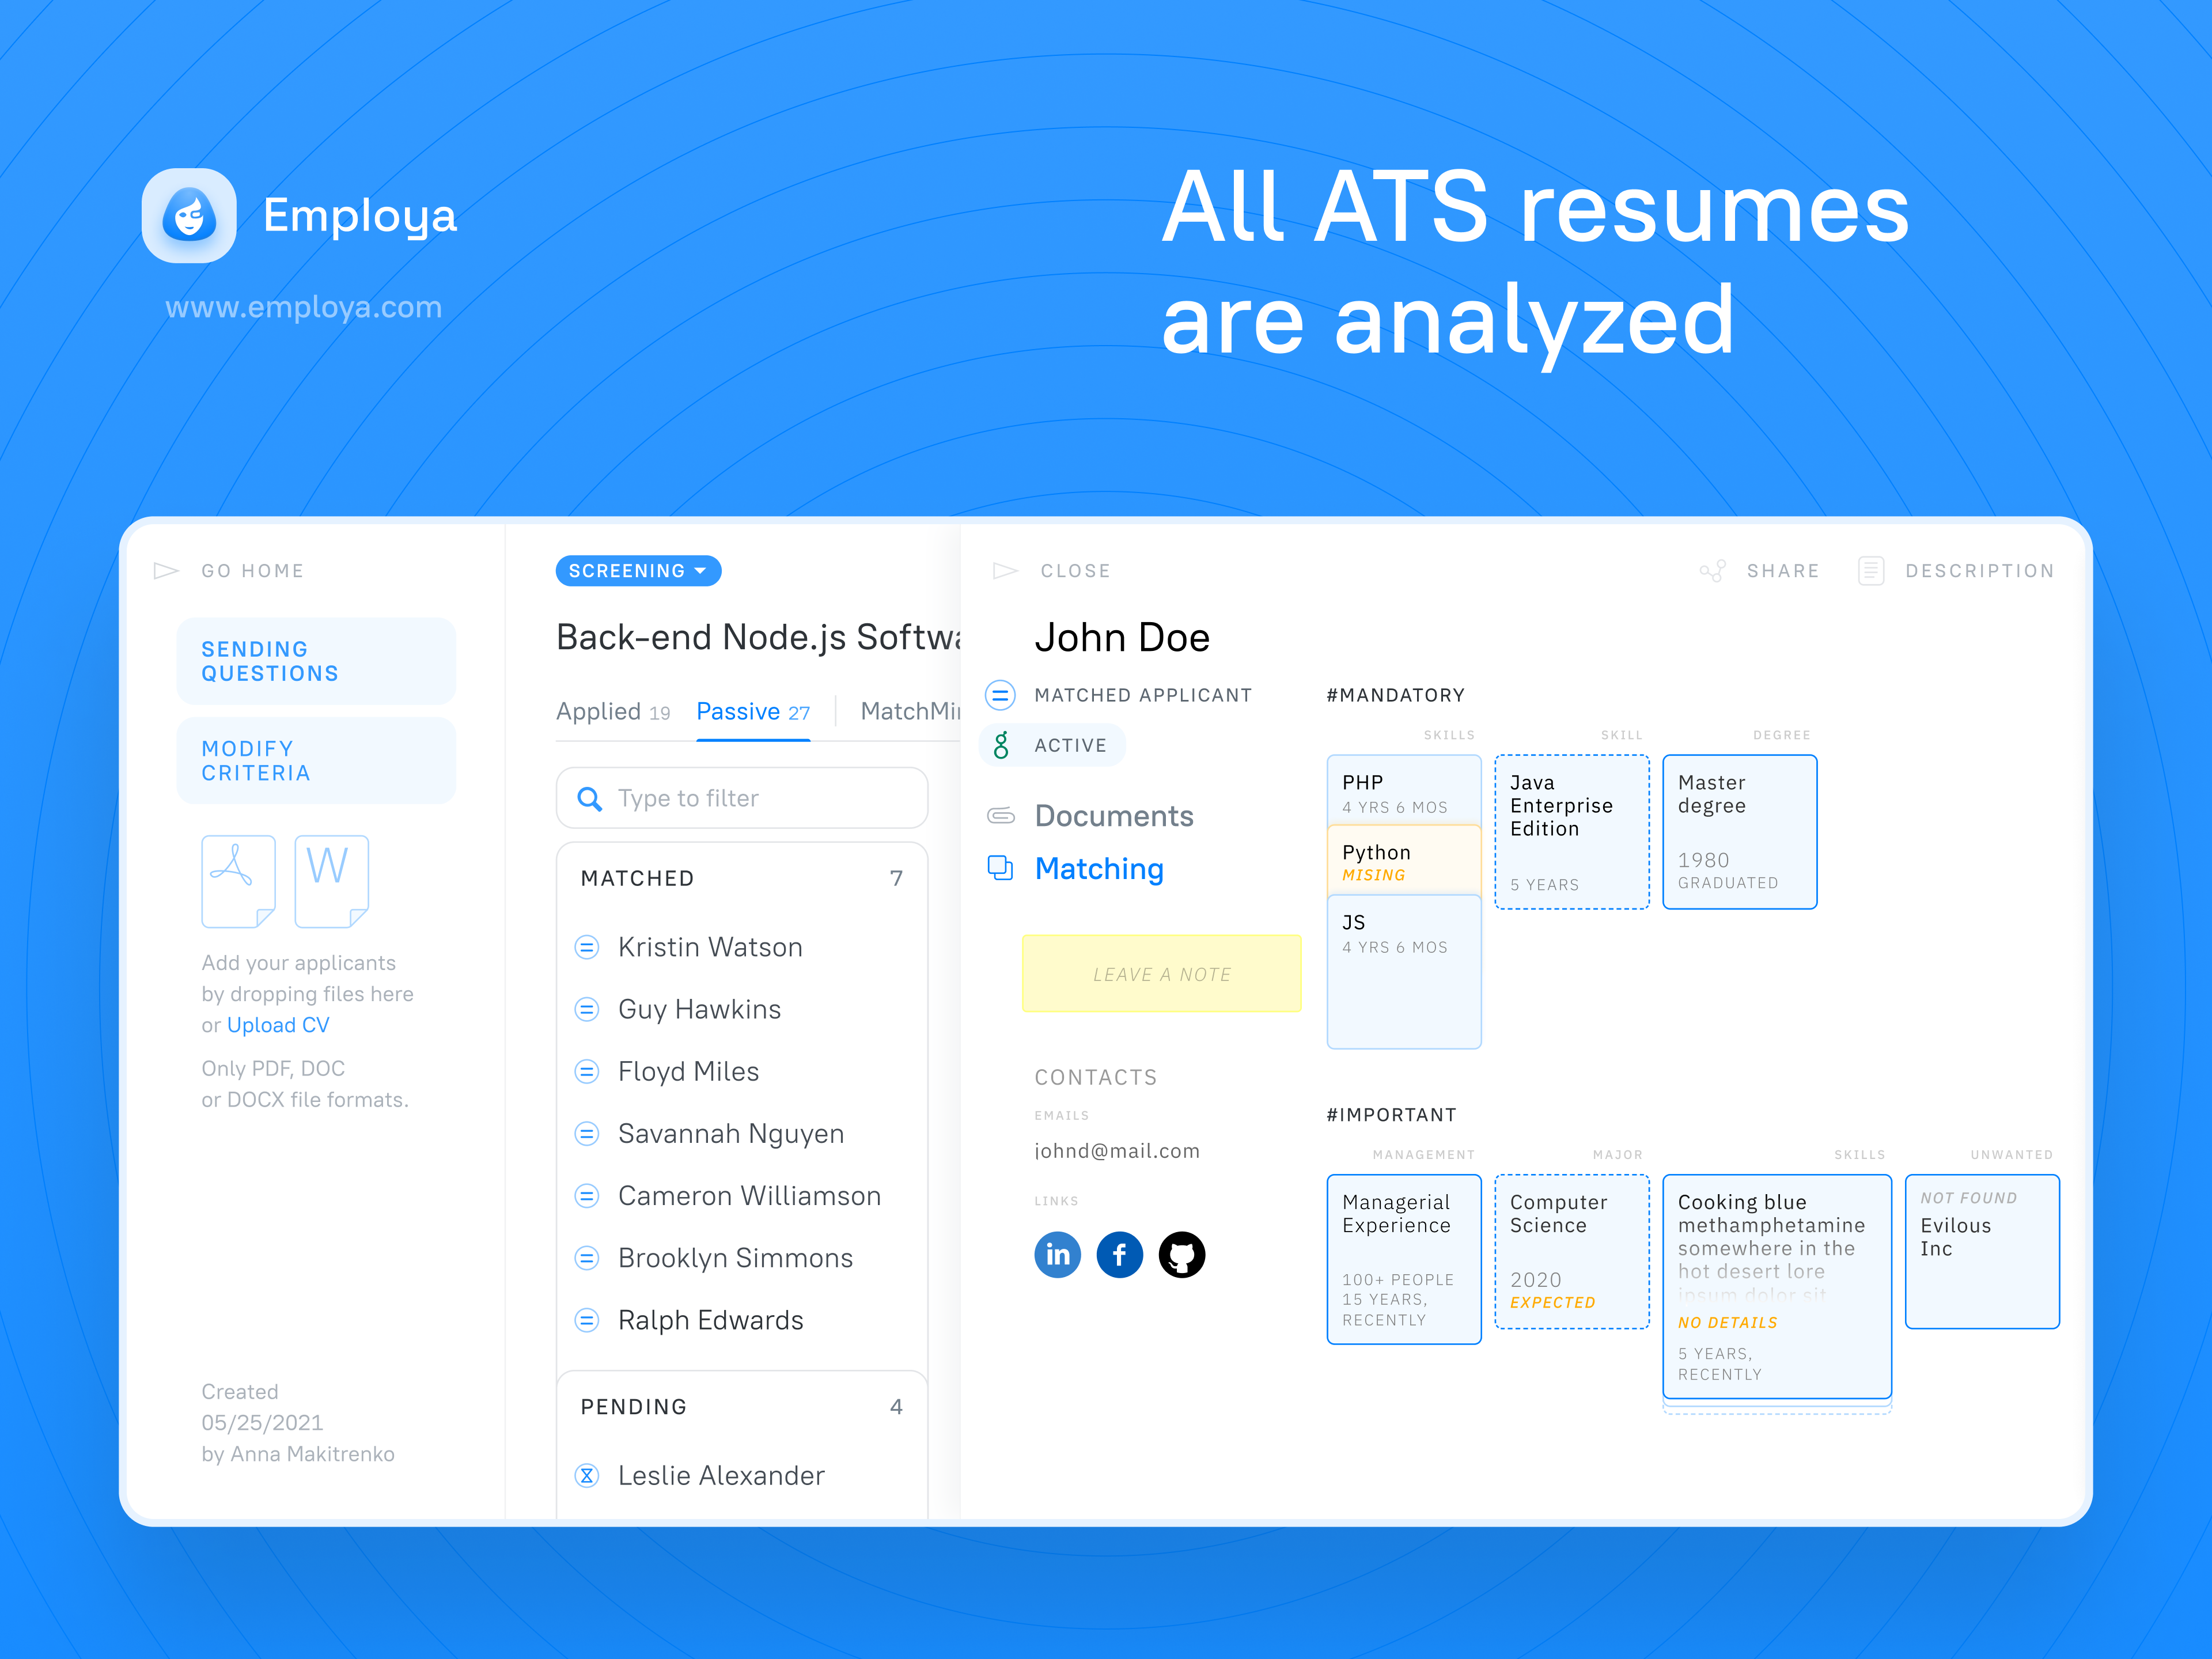 All ATS resumes are analyzed - we don’t skip even a single resume and precisely check each of them